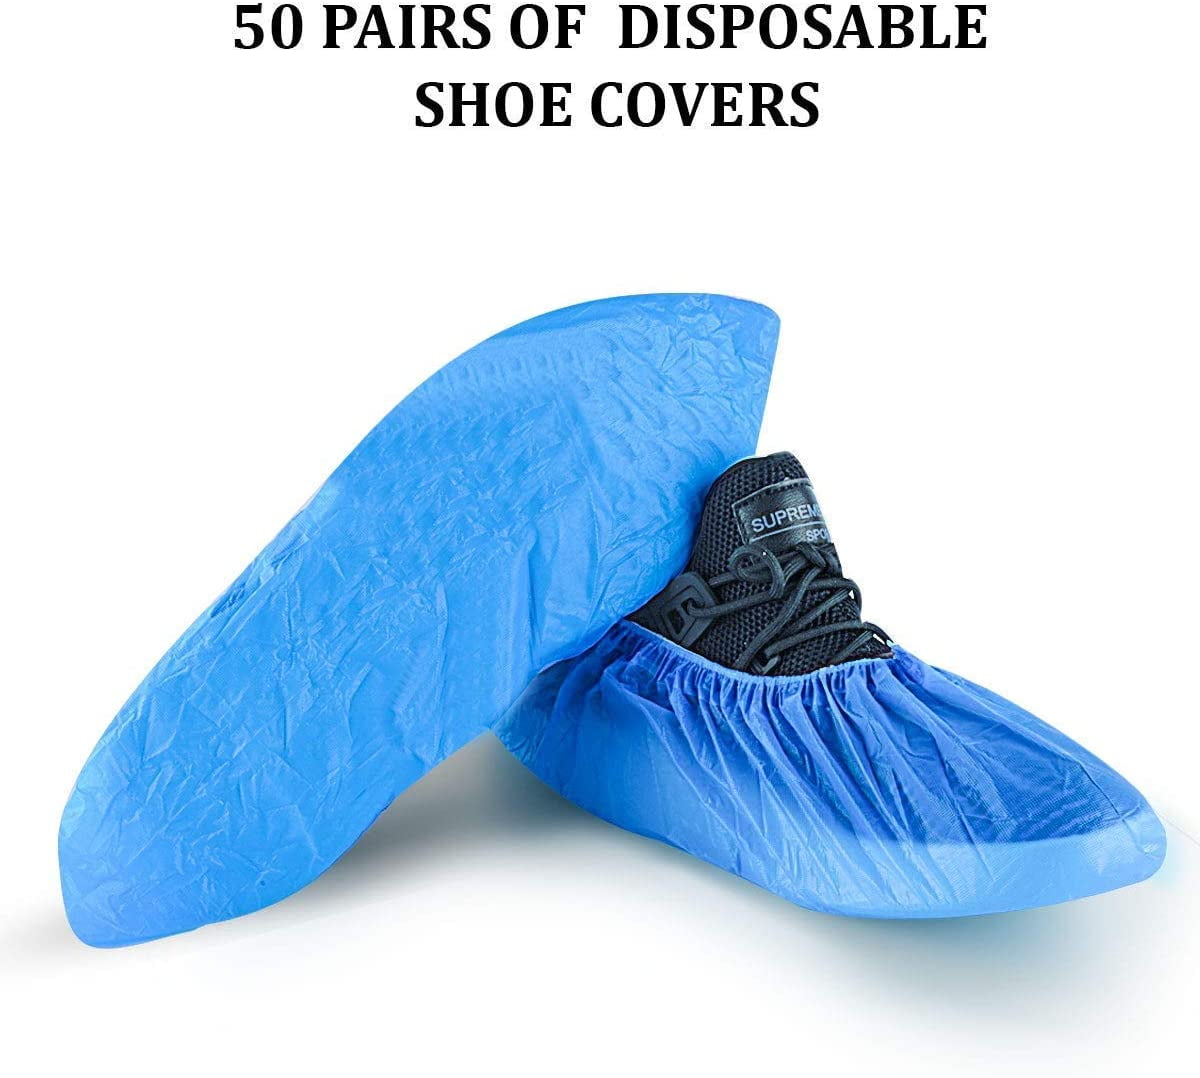 Premium Blue Thicken Plastic Shoe Covers Disposable Anti-slip Overshoes Waterproof Dustproof Boot Shoe Protector Covers for Floor Carpet Protector Open House Visit Cleaning Accessories 